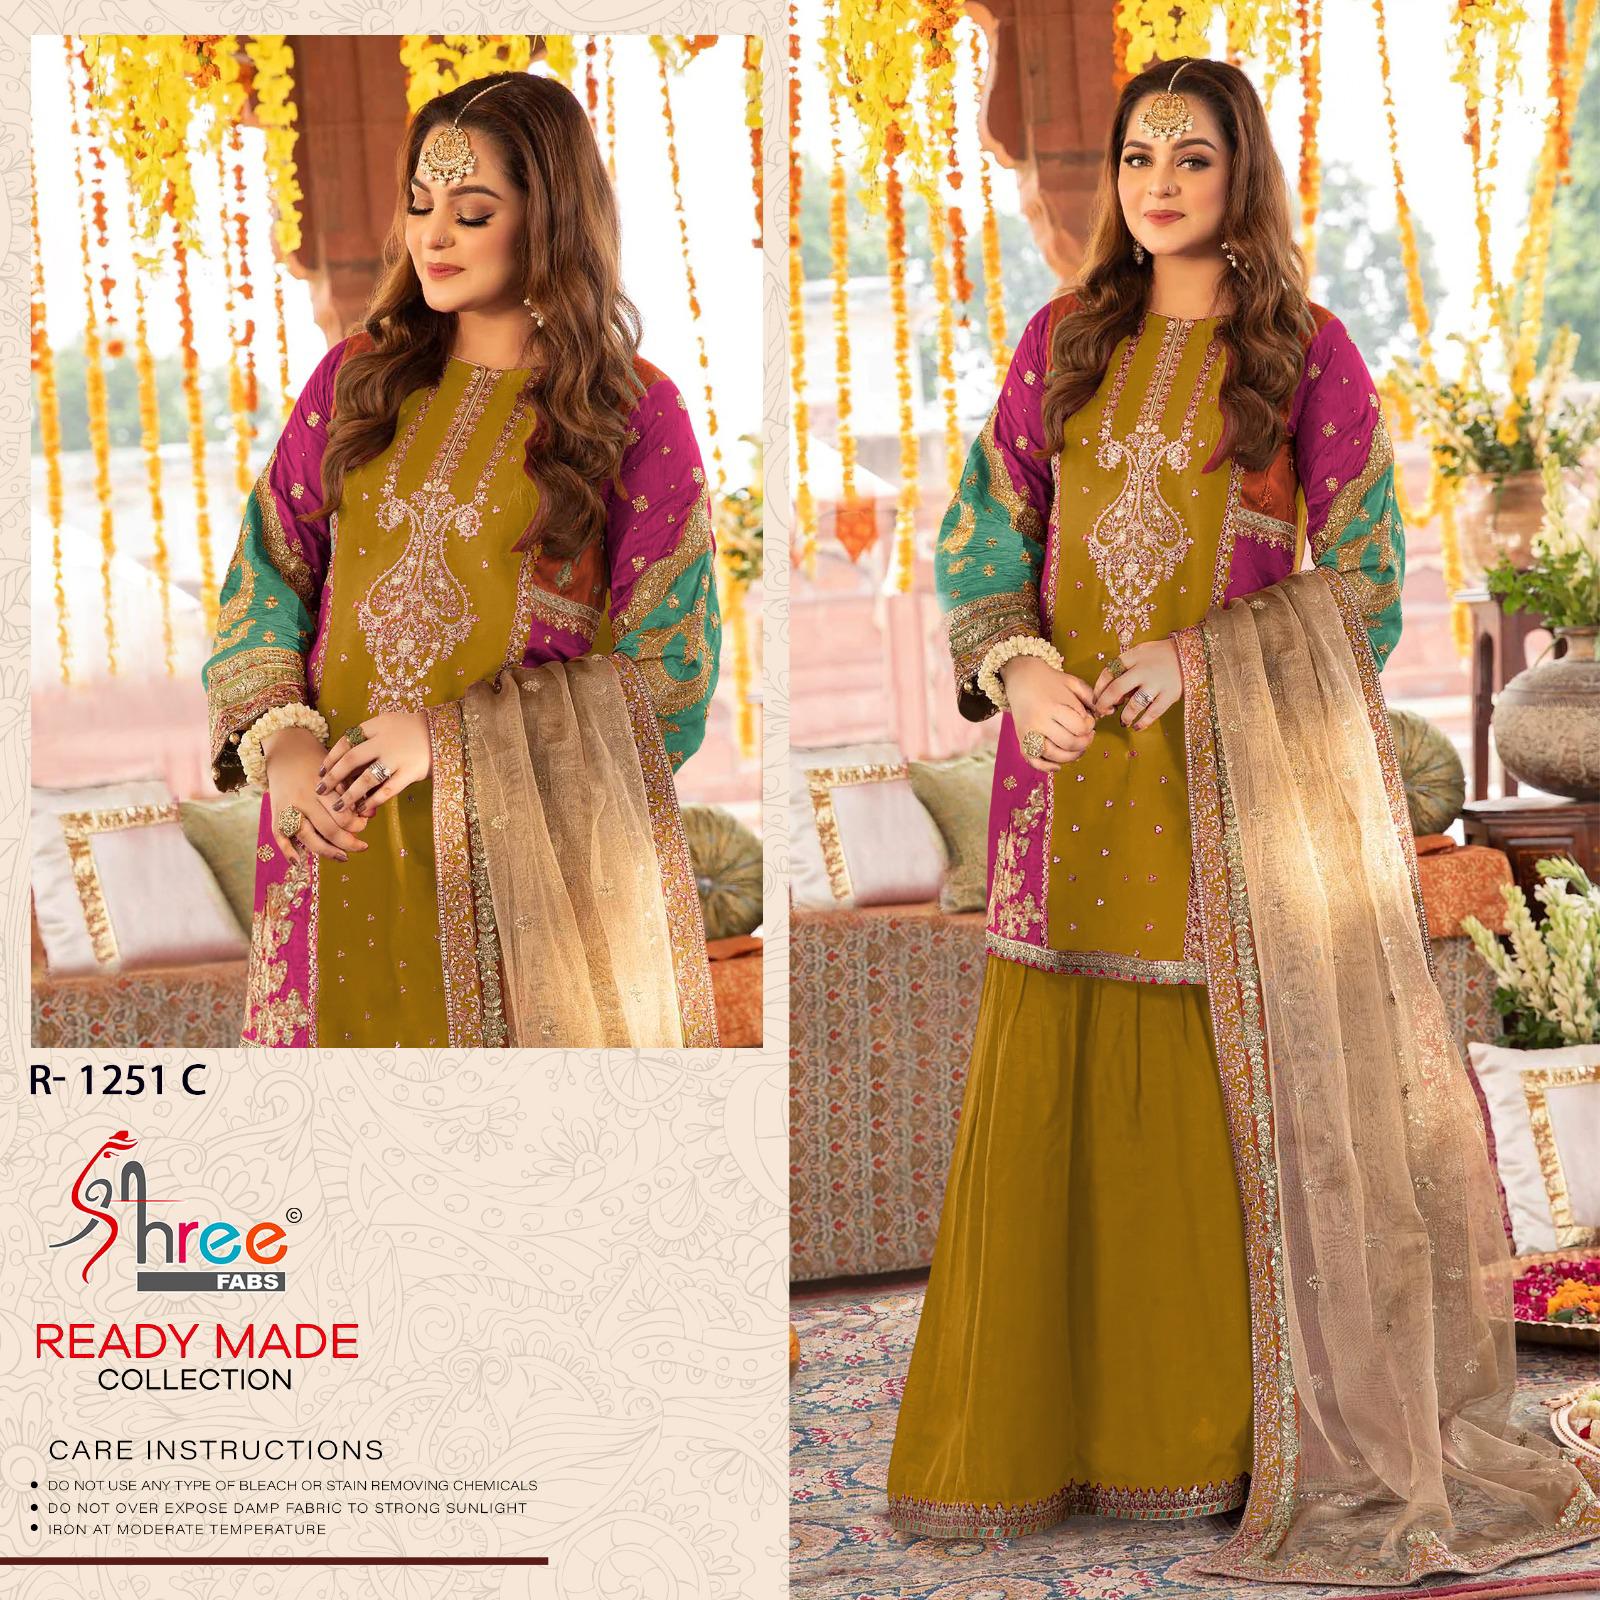 SHREE FAB READY MADE COLLECTION R-1251-C